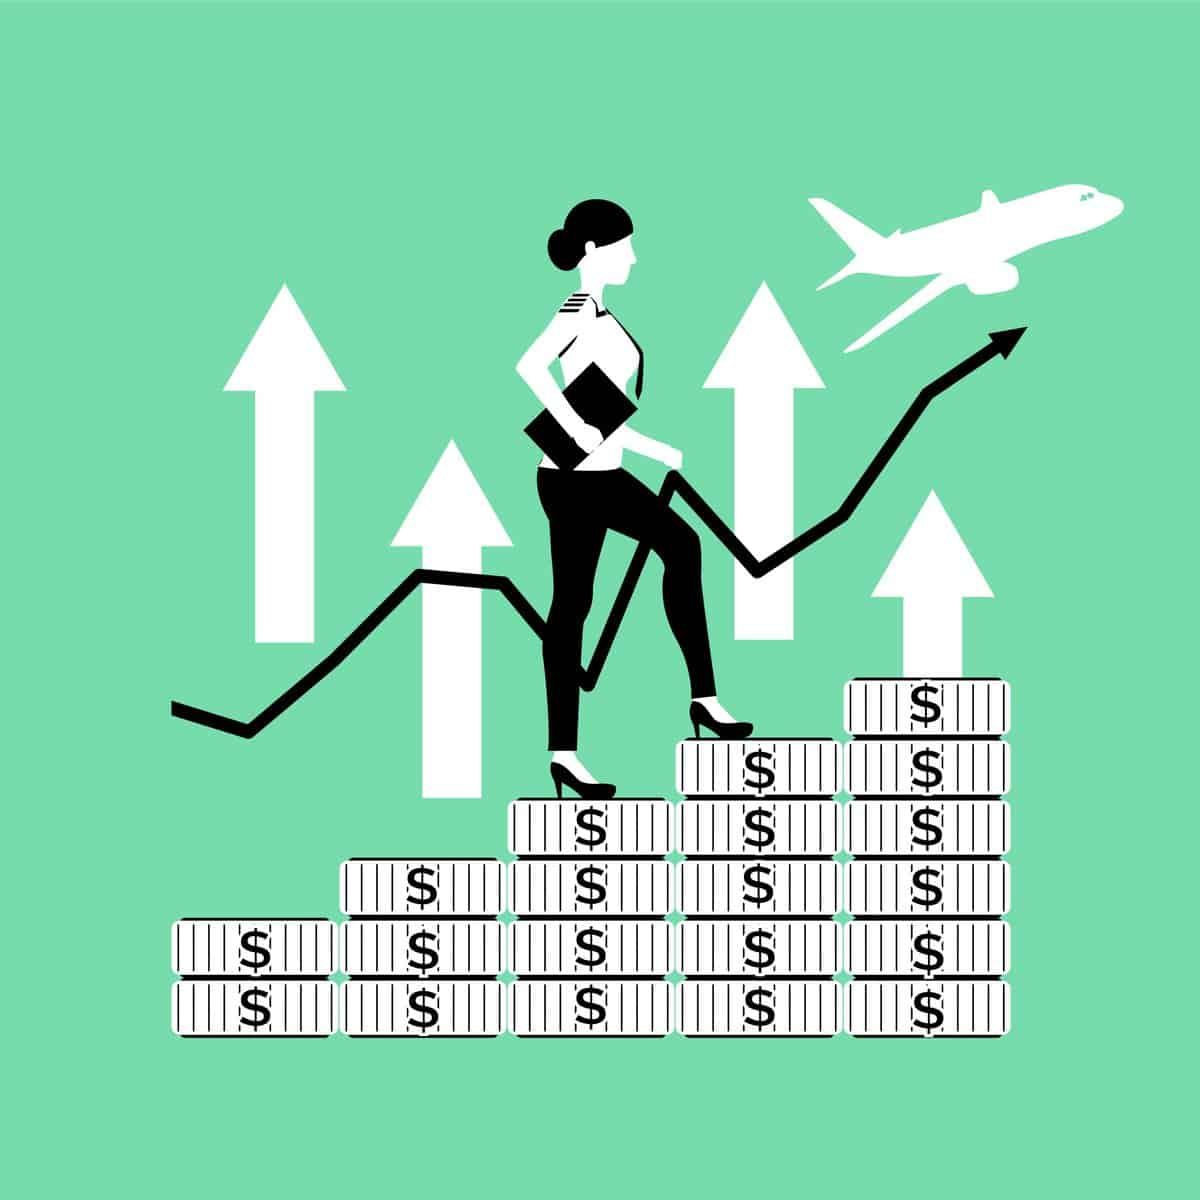 A female pilot climbing up the stairs of money, symbolising her pilot career progression and commercial pilot salary.